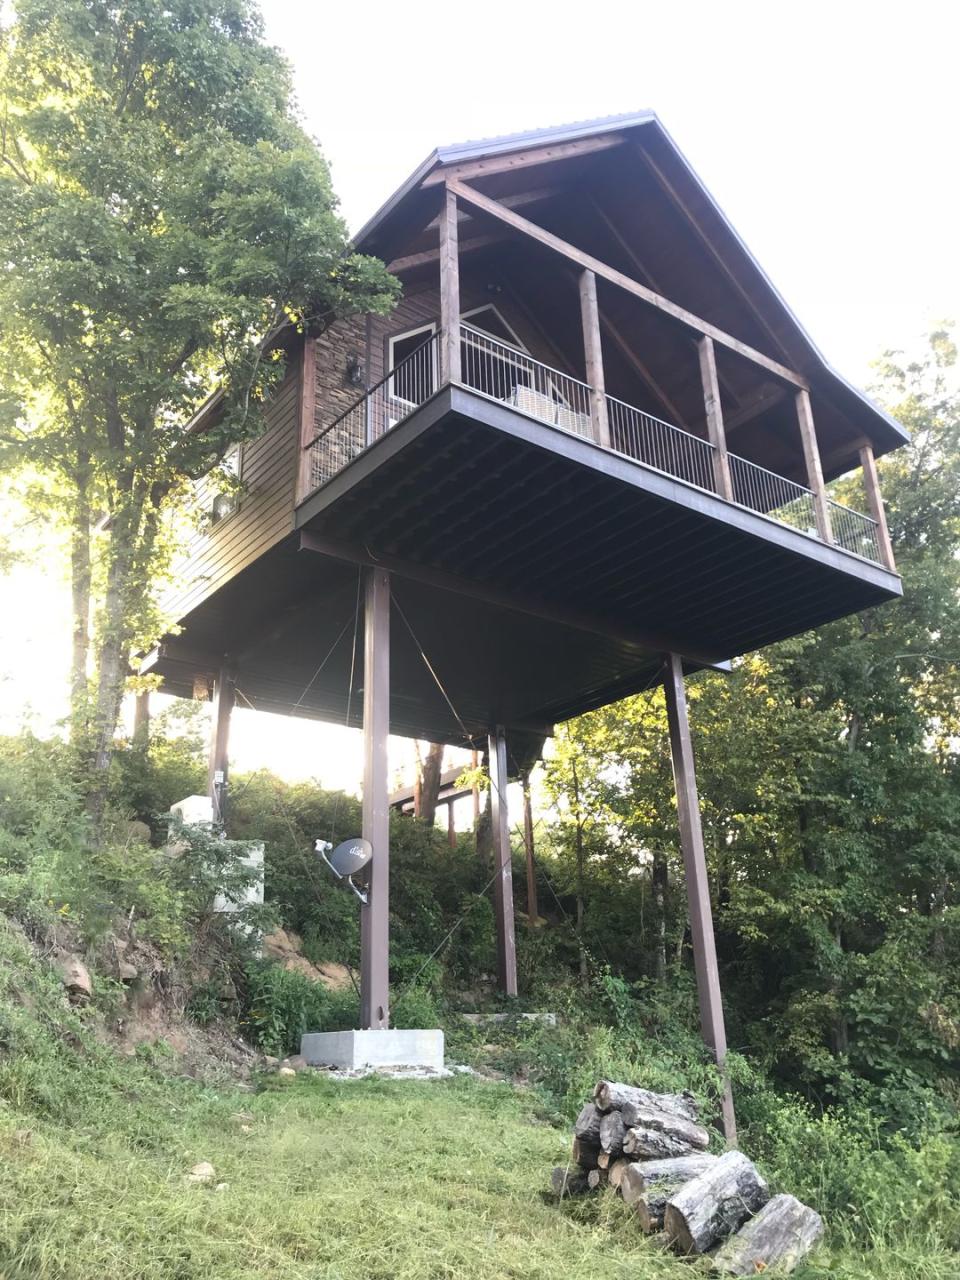 <p>This gorgeous and perfectly appointed cabin is suspended over the Arkansas Grand Canyon. Guests can enjoy the views from a hammock on the balcony or cozy up in front of the fireplace. The cabin, which is part of <a href="https://www.buffalorivervacations.com/" rel="nofollow noopener" target="_blank" data-ylk="slk:Buffalo River Vacations'" class="link ">Buffalo River Vacations'</a> collection of unique homes, is located in the Ozark Mountains, in the quaint town of <a href="https://www.arkansas.com/jasper" rel="nofollow noopener" target="_blank" data-ylk="slk:Jasper" class="link ">Jasper</a>, is a haven for outdoor enthusiasts.</p><p><a class="link " href="https://go.redirectingat.com?id=74968X1596630&url=https%3A%2F%2Fwww.airbnb.com%2Frooms%2F15869590&sref=https%3A%2F%2Fwww.goodhousekeeping.com%2Flife%2Ftravel%2Fg42318799%2Fmost-unique-airbnb-in-every-state%2F" rel="nofollow noopener" target="_blank" data-ylk="slk:Shop Now">Shop Now</a></p>